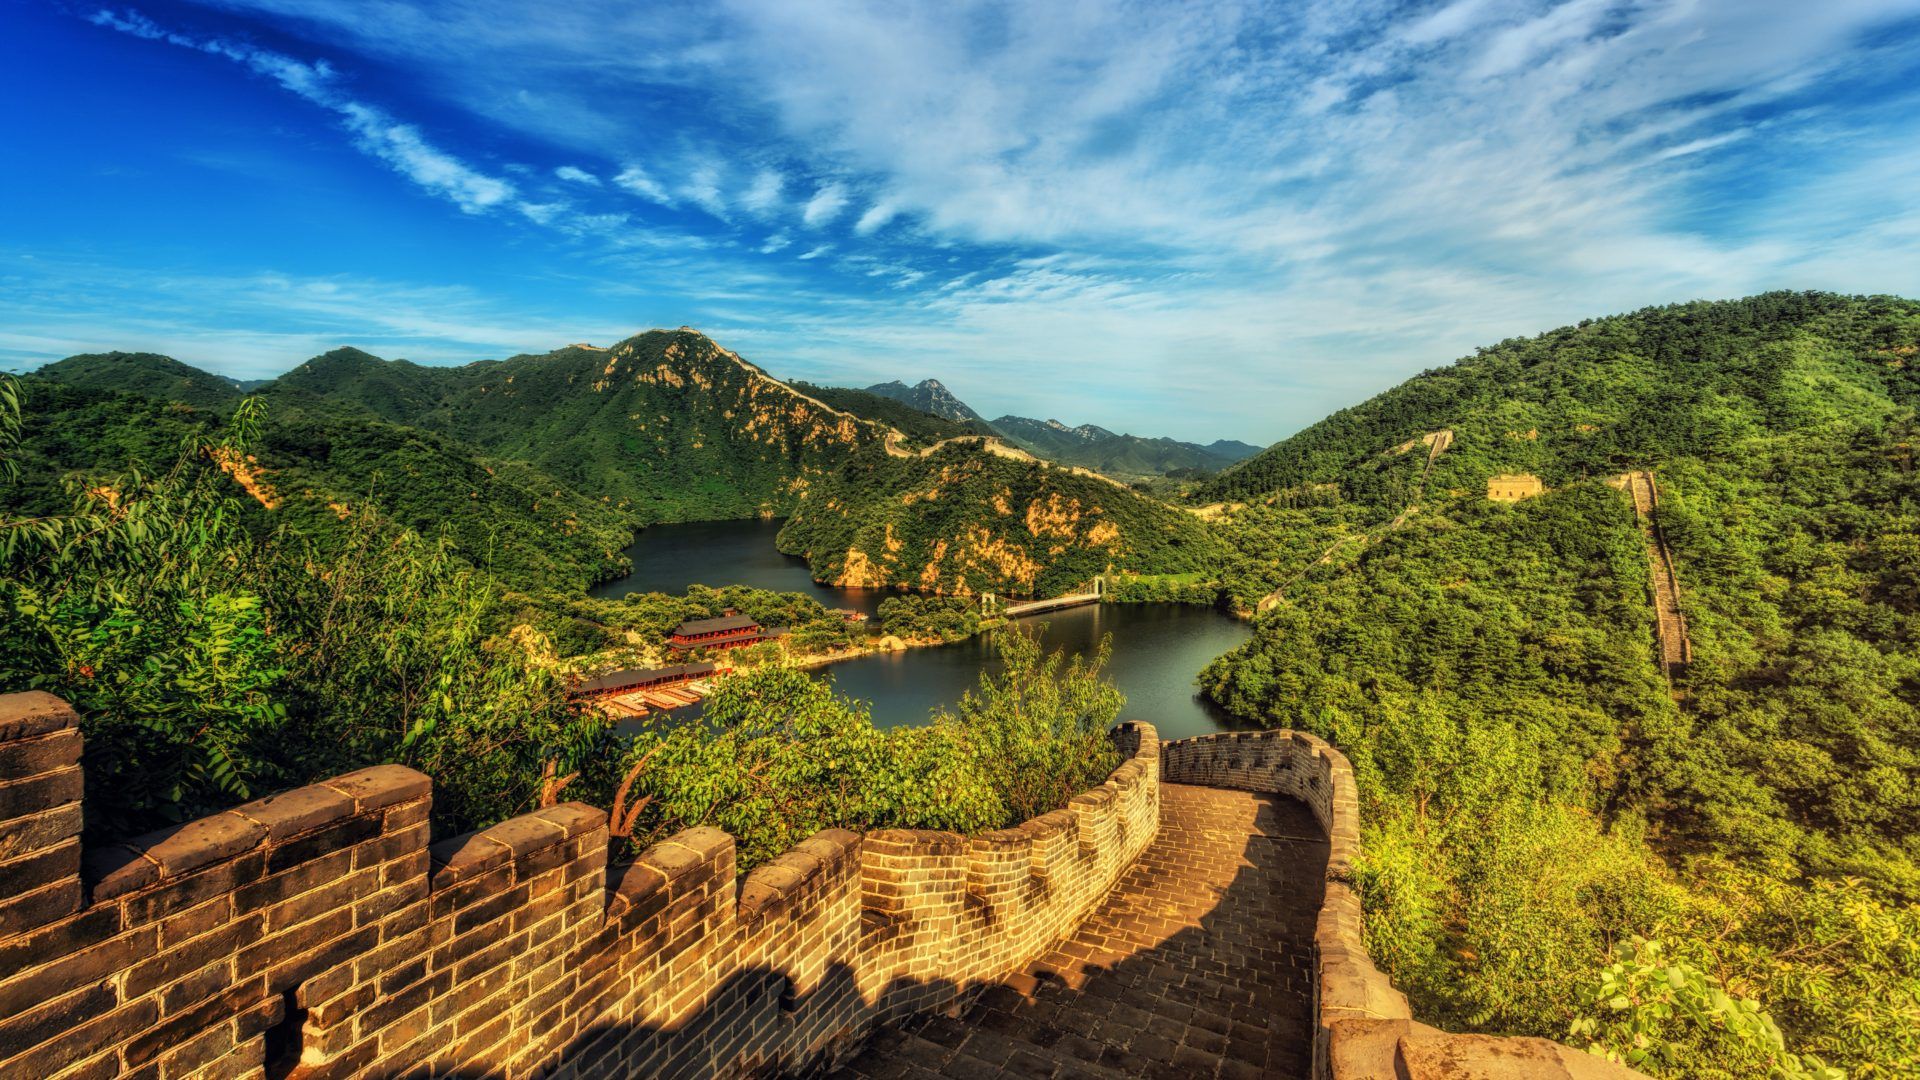 Historical Place In Beijing, China Great Wall Of China 4k Ultra HD Wallpaper For Desktop Laptop Tablet Mobile Phones And Tv 6000x3375, Wallpaper13.com